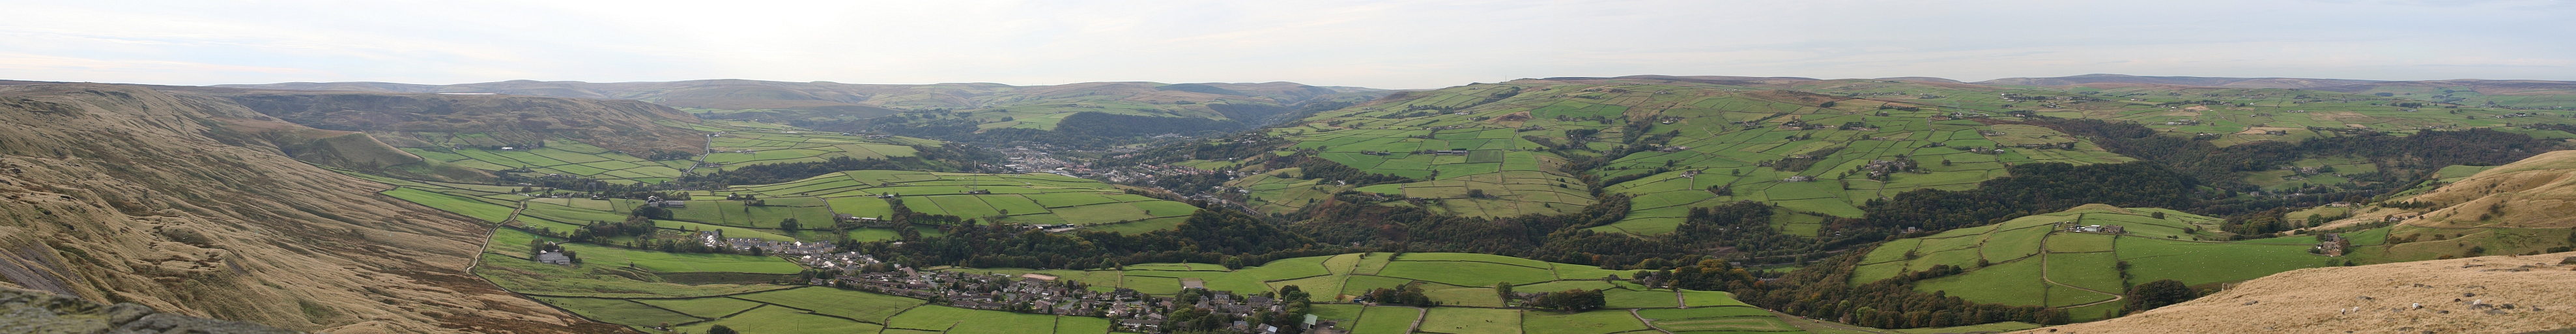 Panorama of the Calder Valley with the town of Todmorden, West Yorkshire from a balcony of Stoodley Pike